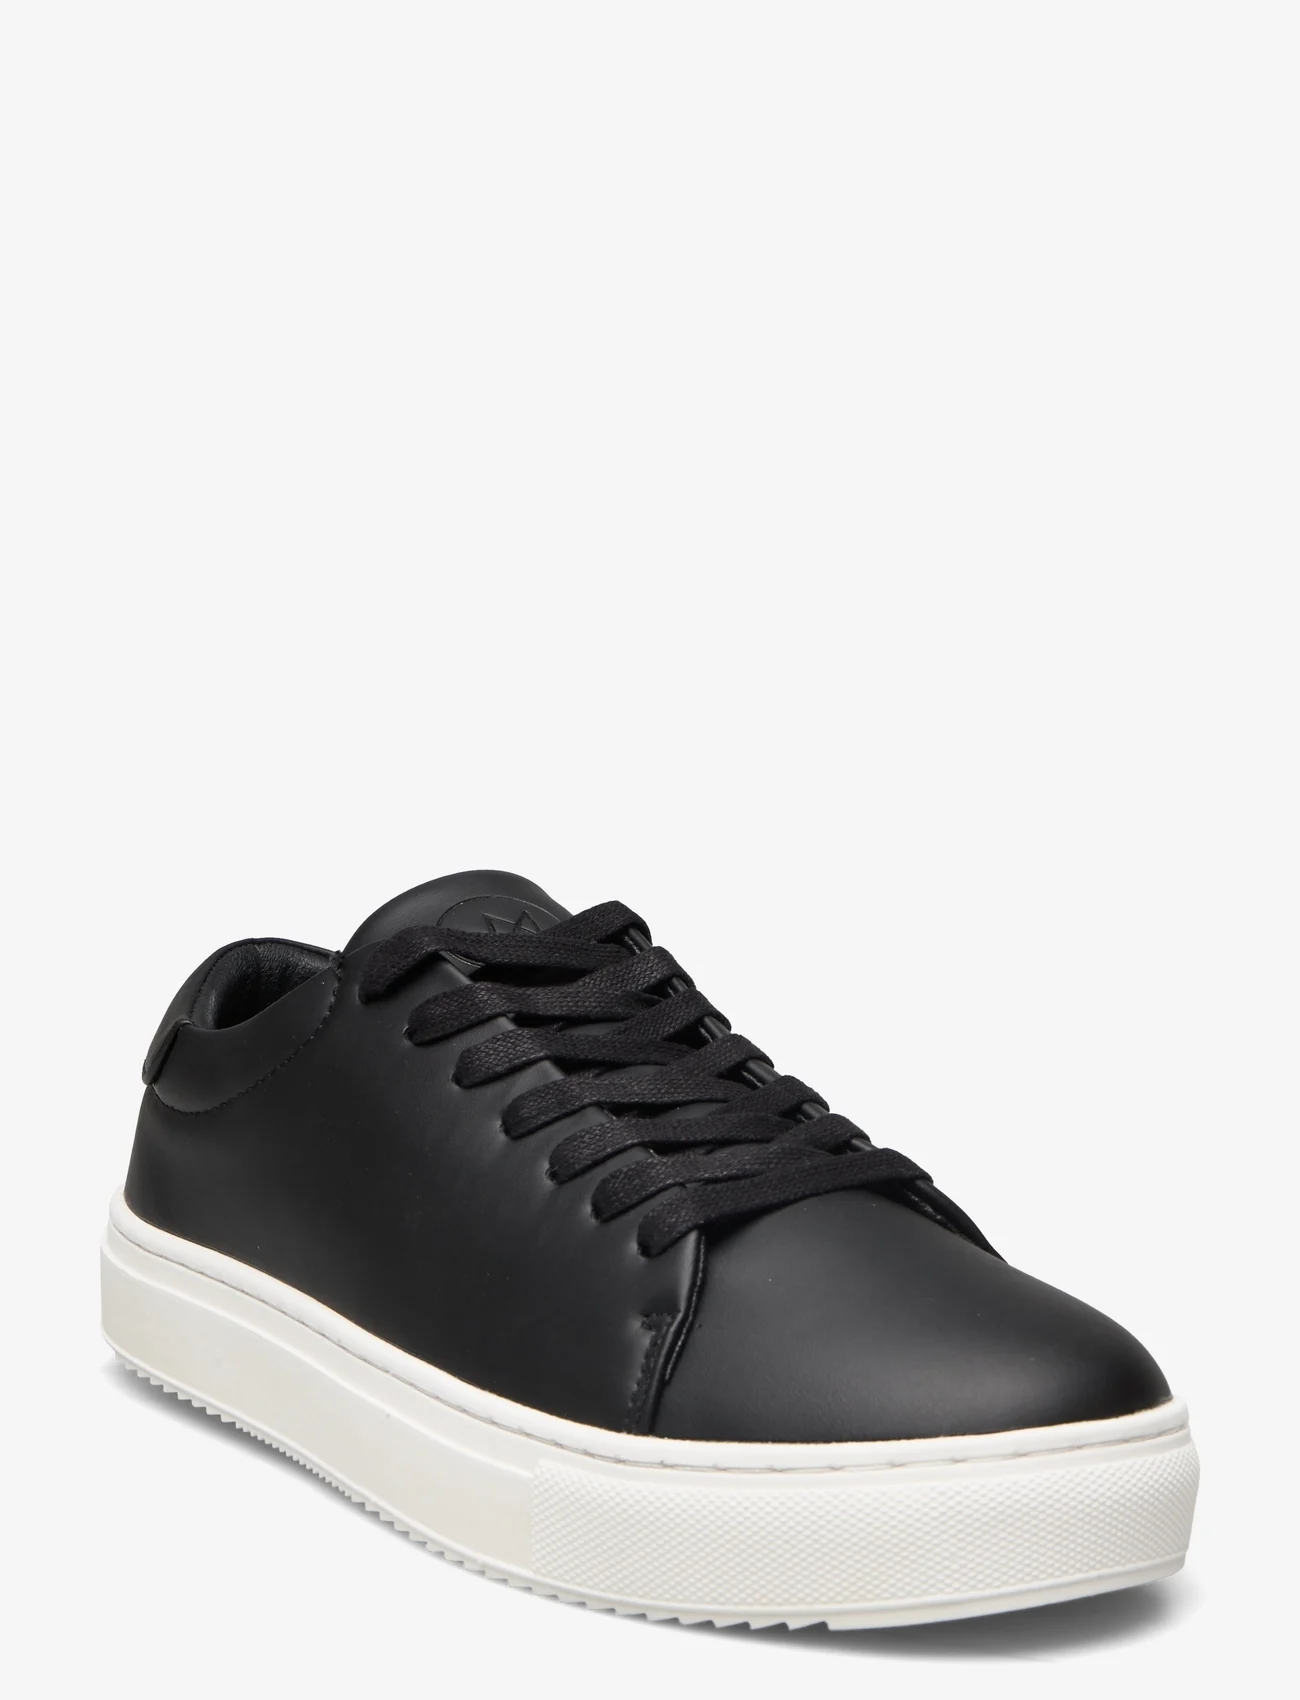 Kronstadt - Connor - lave sneakers - black / white - 0